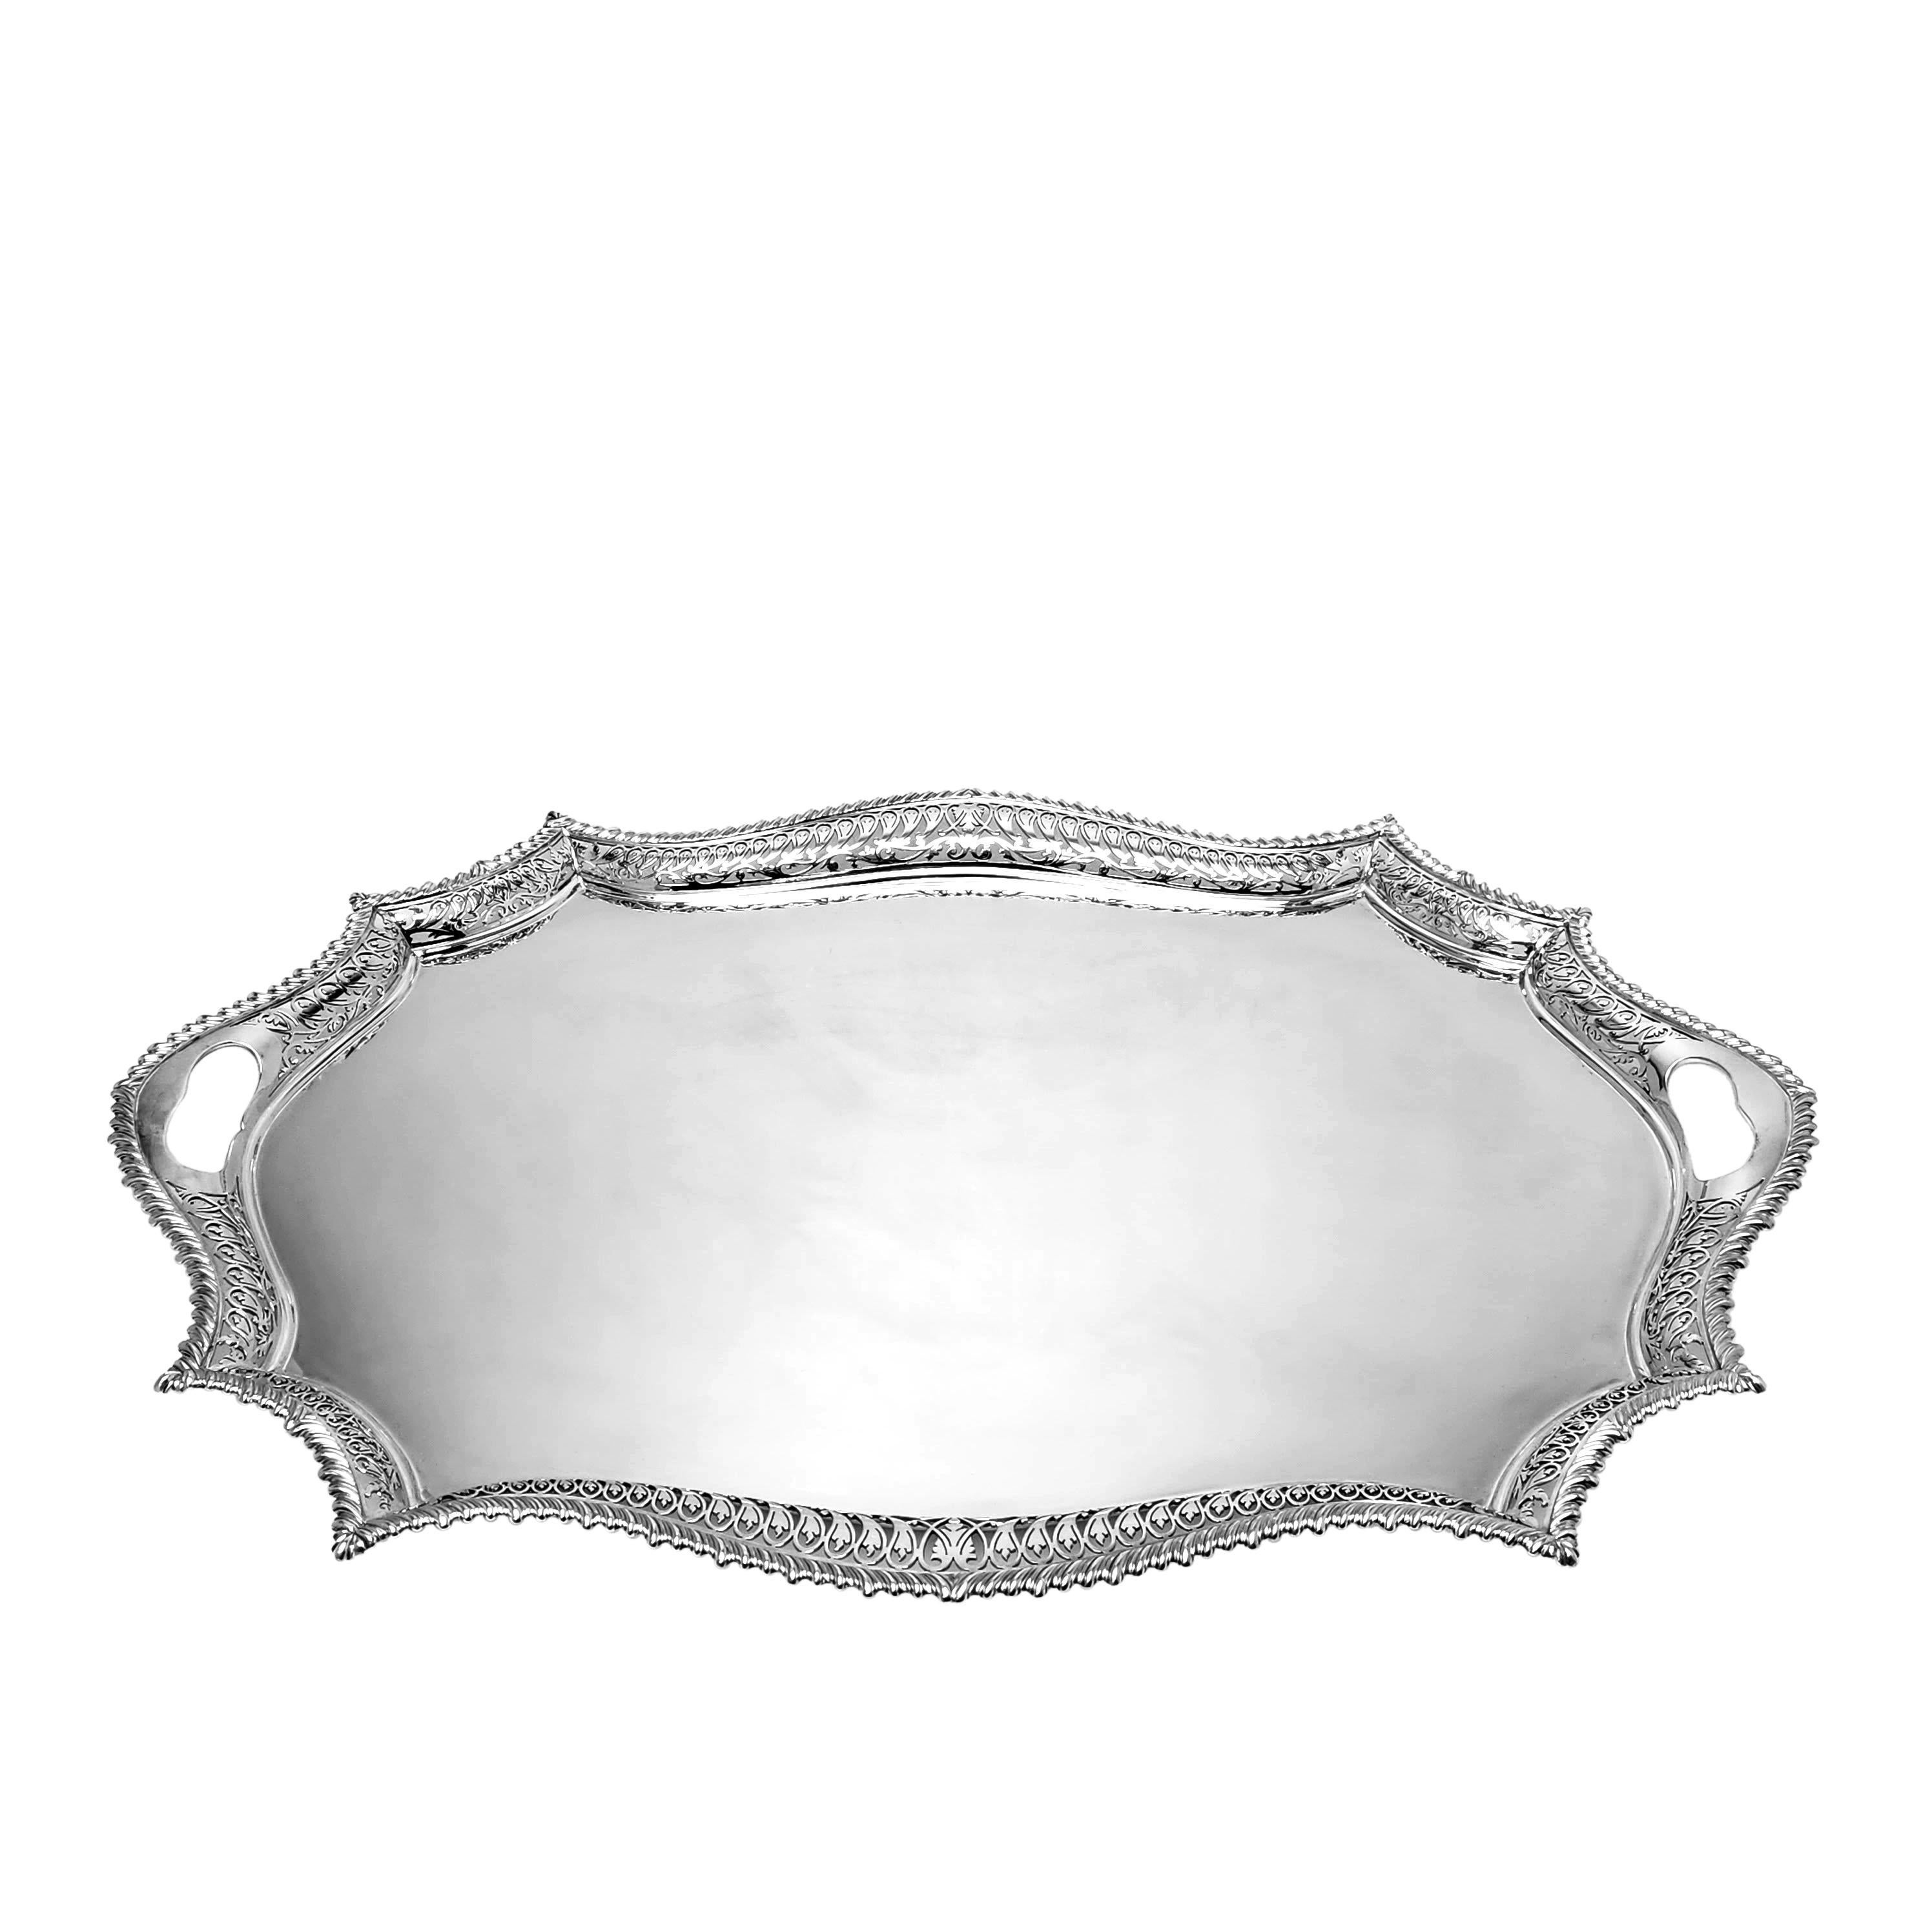 An elegant Silver Serving Tray a shaped rim and beautifully pierced border. The Tray is embellished with a classic gadroon edge on the shaped border. The Tray is of substantial size suitable for Tea Sets.

Made in London, England in 1906 by Reid &